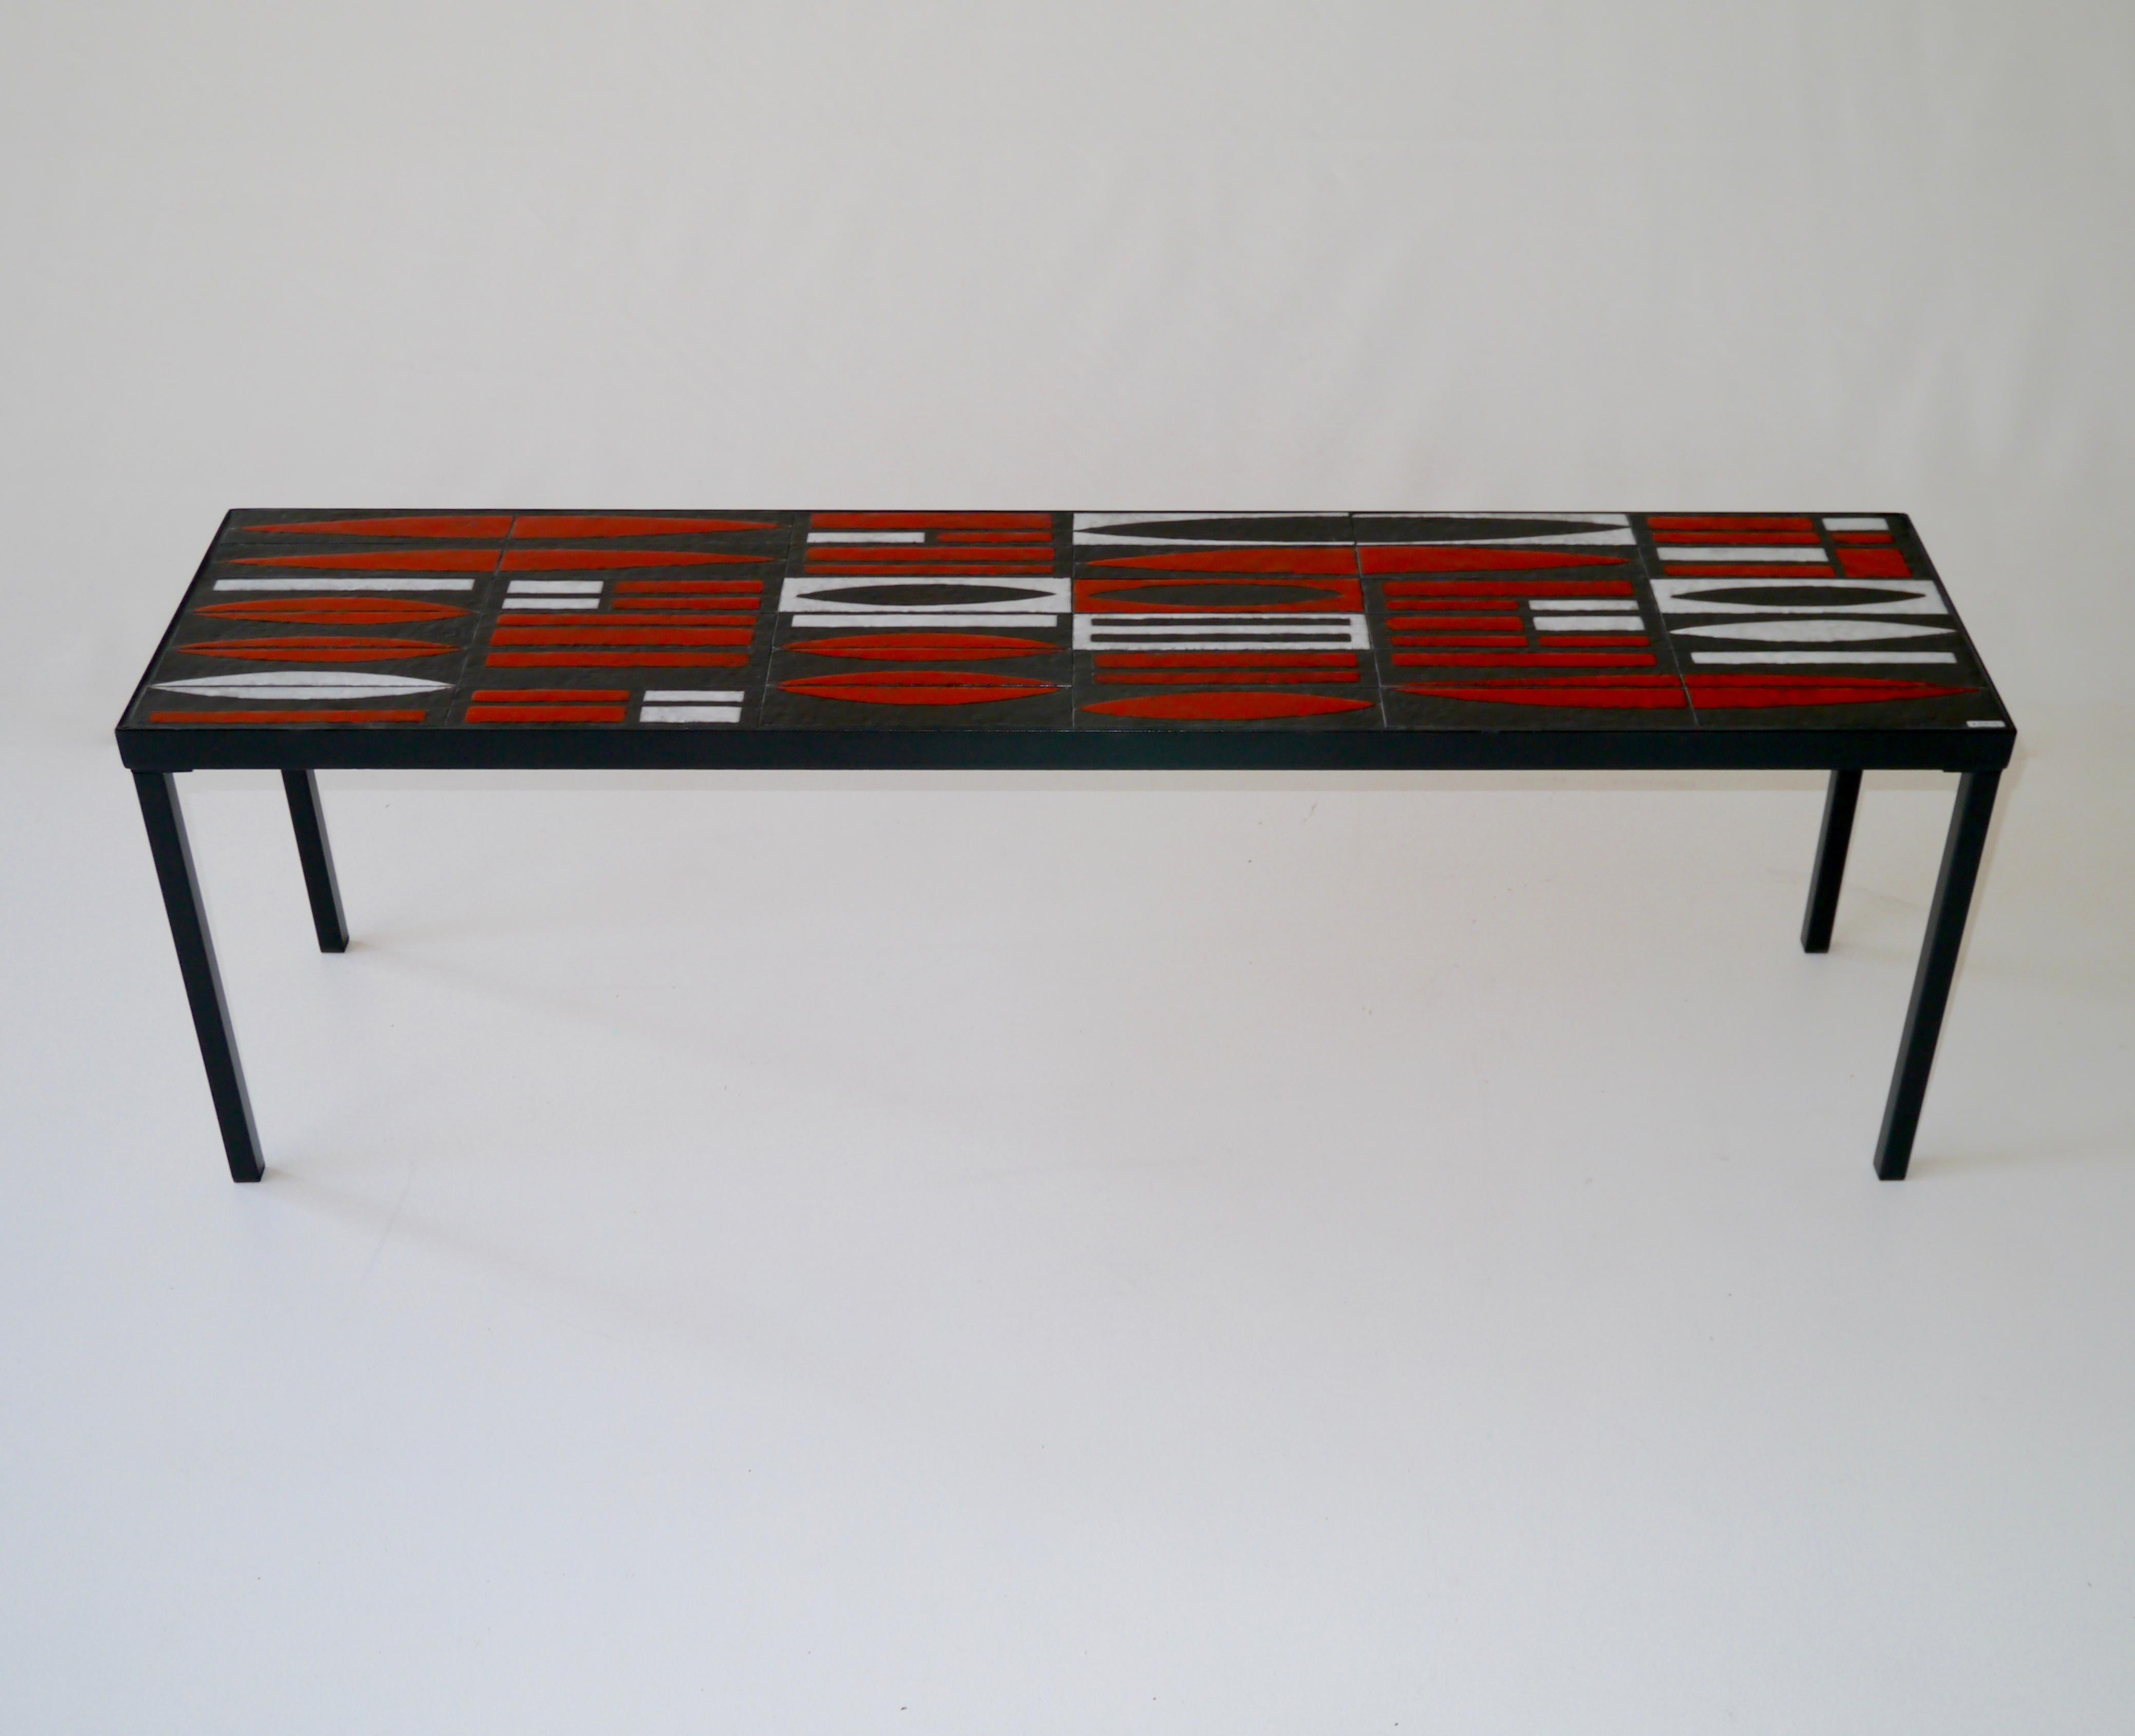 A wonderful and very unusual example of Roger Capron's work from the 1950s.
Black hammered ceramic tiles with rhythmic drawings realised in matte-white and shiny red glazes.
Signed by the Artist.
Frame and legs in black lacquered steel have been